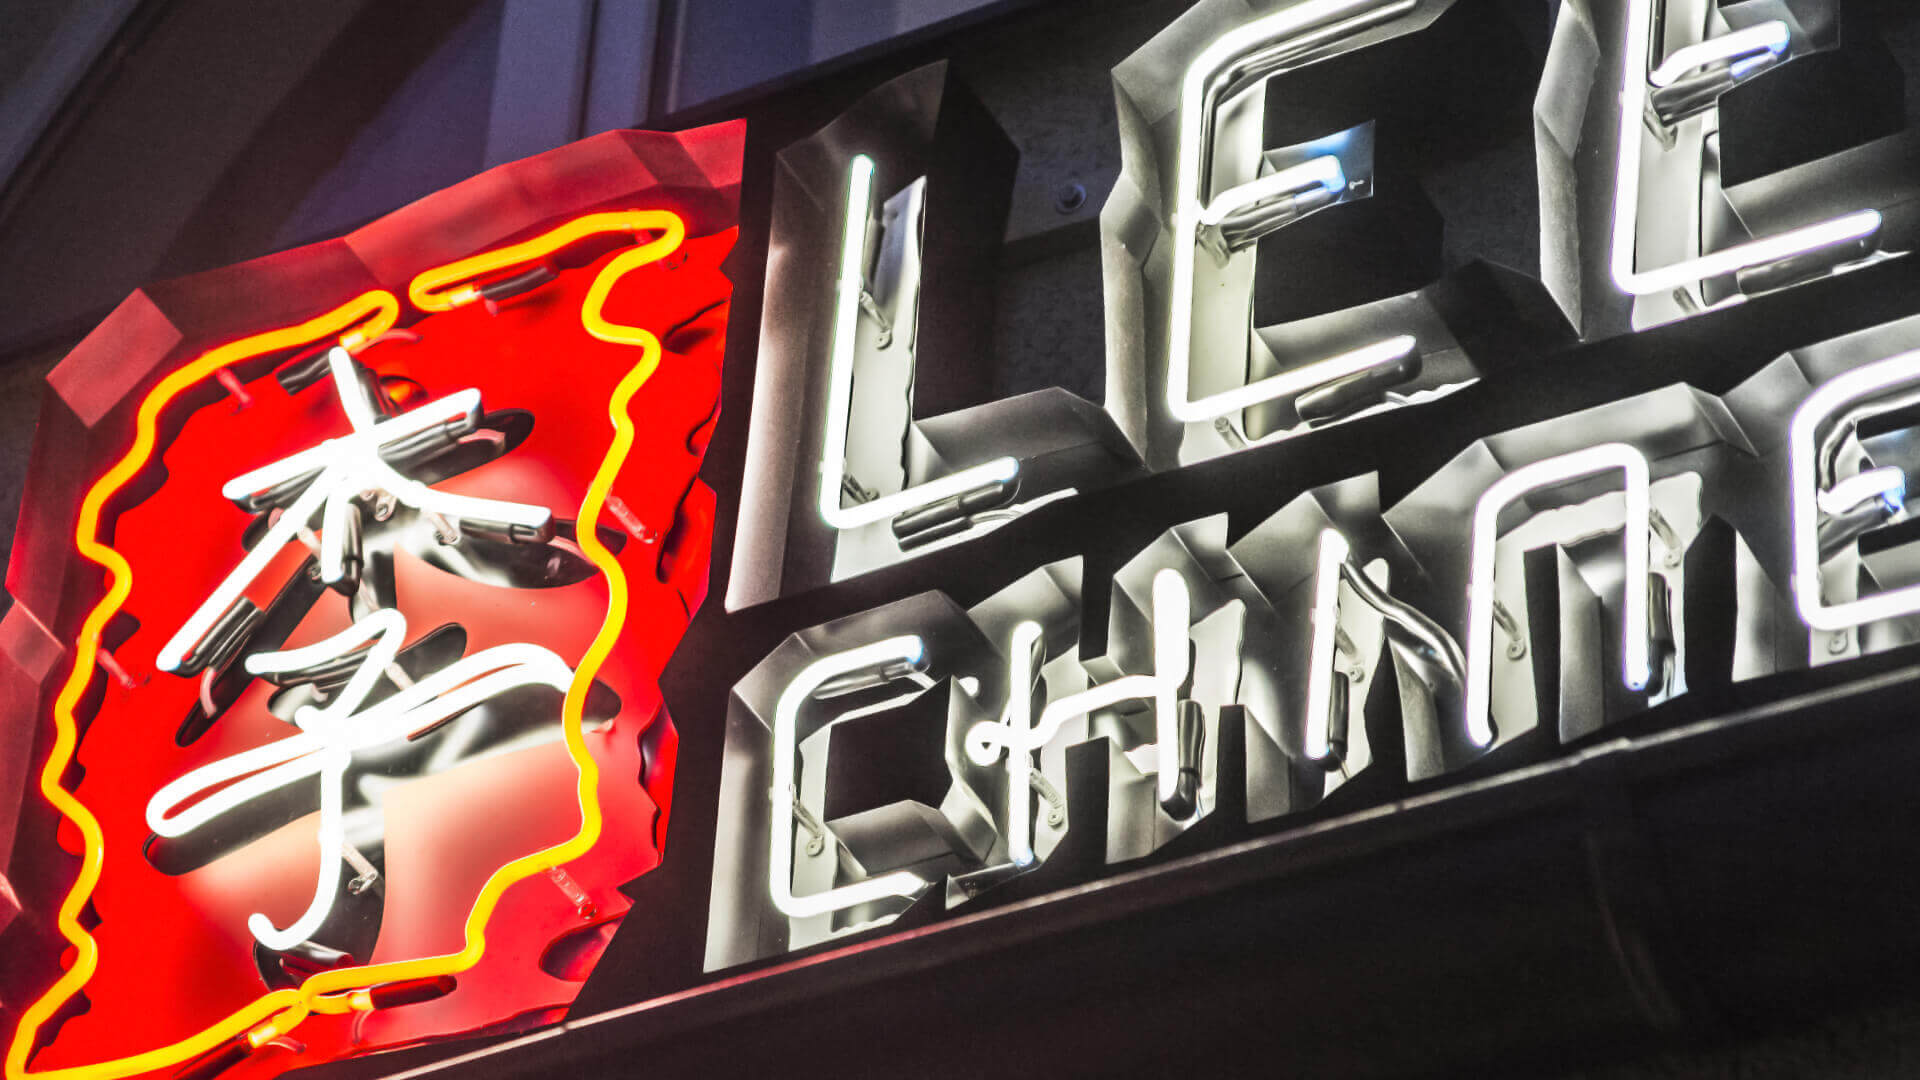 Lees Chines - neon-lees-chinese-neon-above-entry-to-the-restaurant-neon-on-the-wall-neon-on-the-outside-neon-in-melate-rusting-logo-sign-chinese-letter-signs-neon-lites-illuminated-china-restuarant-gdansk